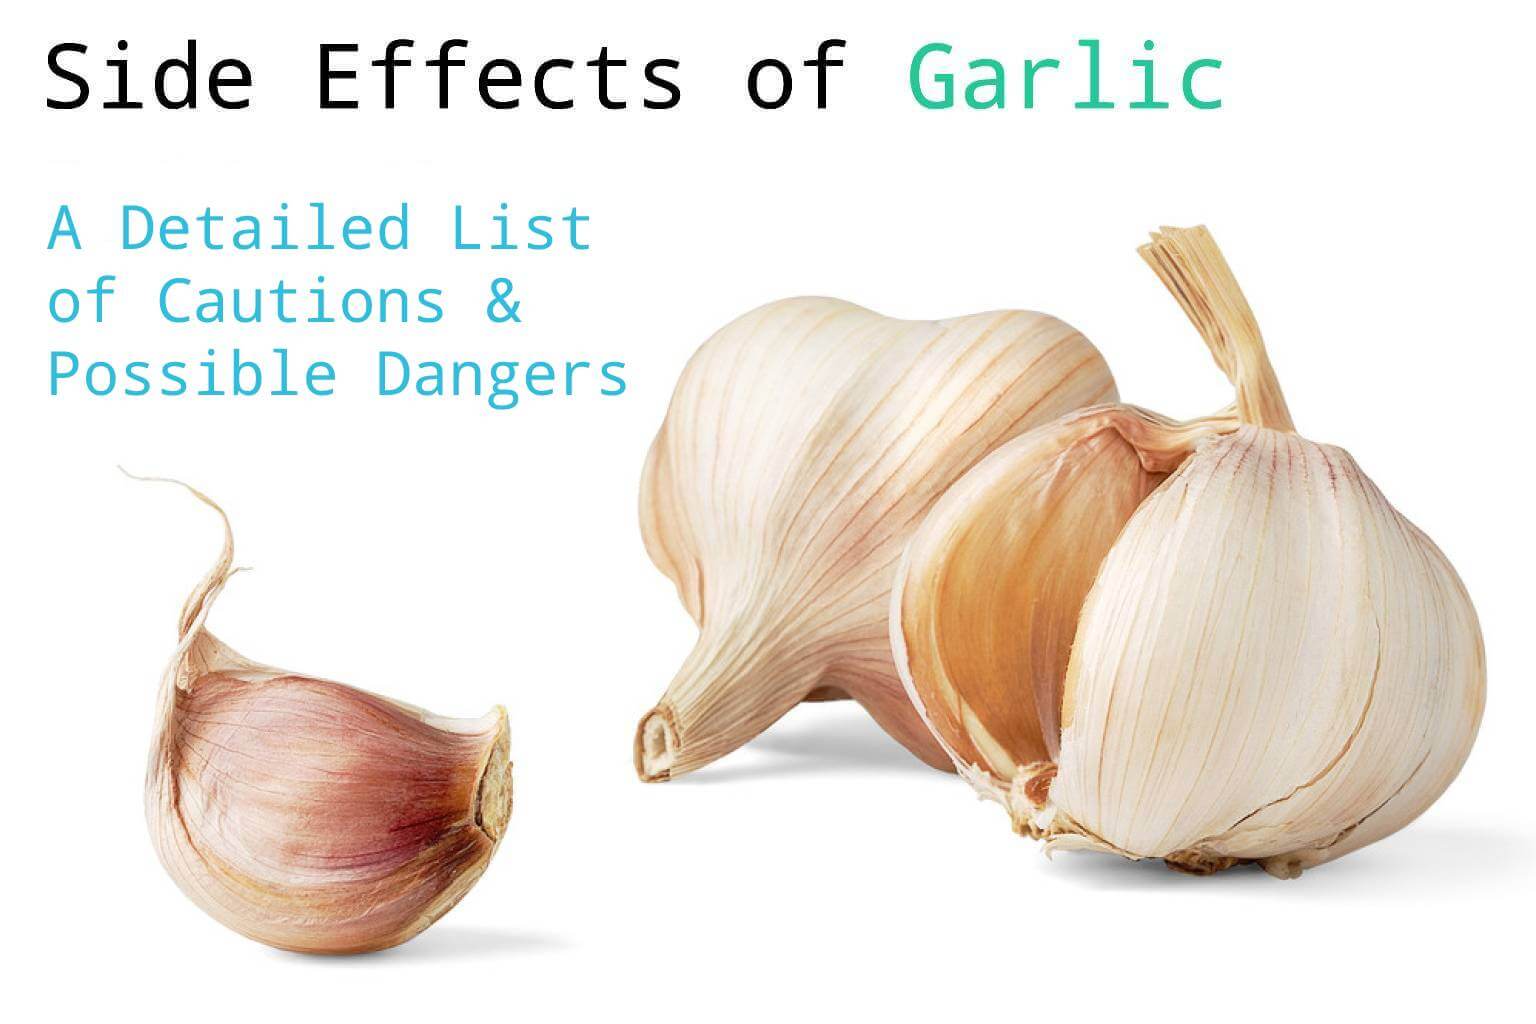 The Side Effects of Garlic